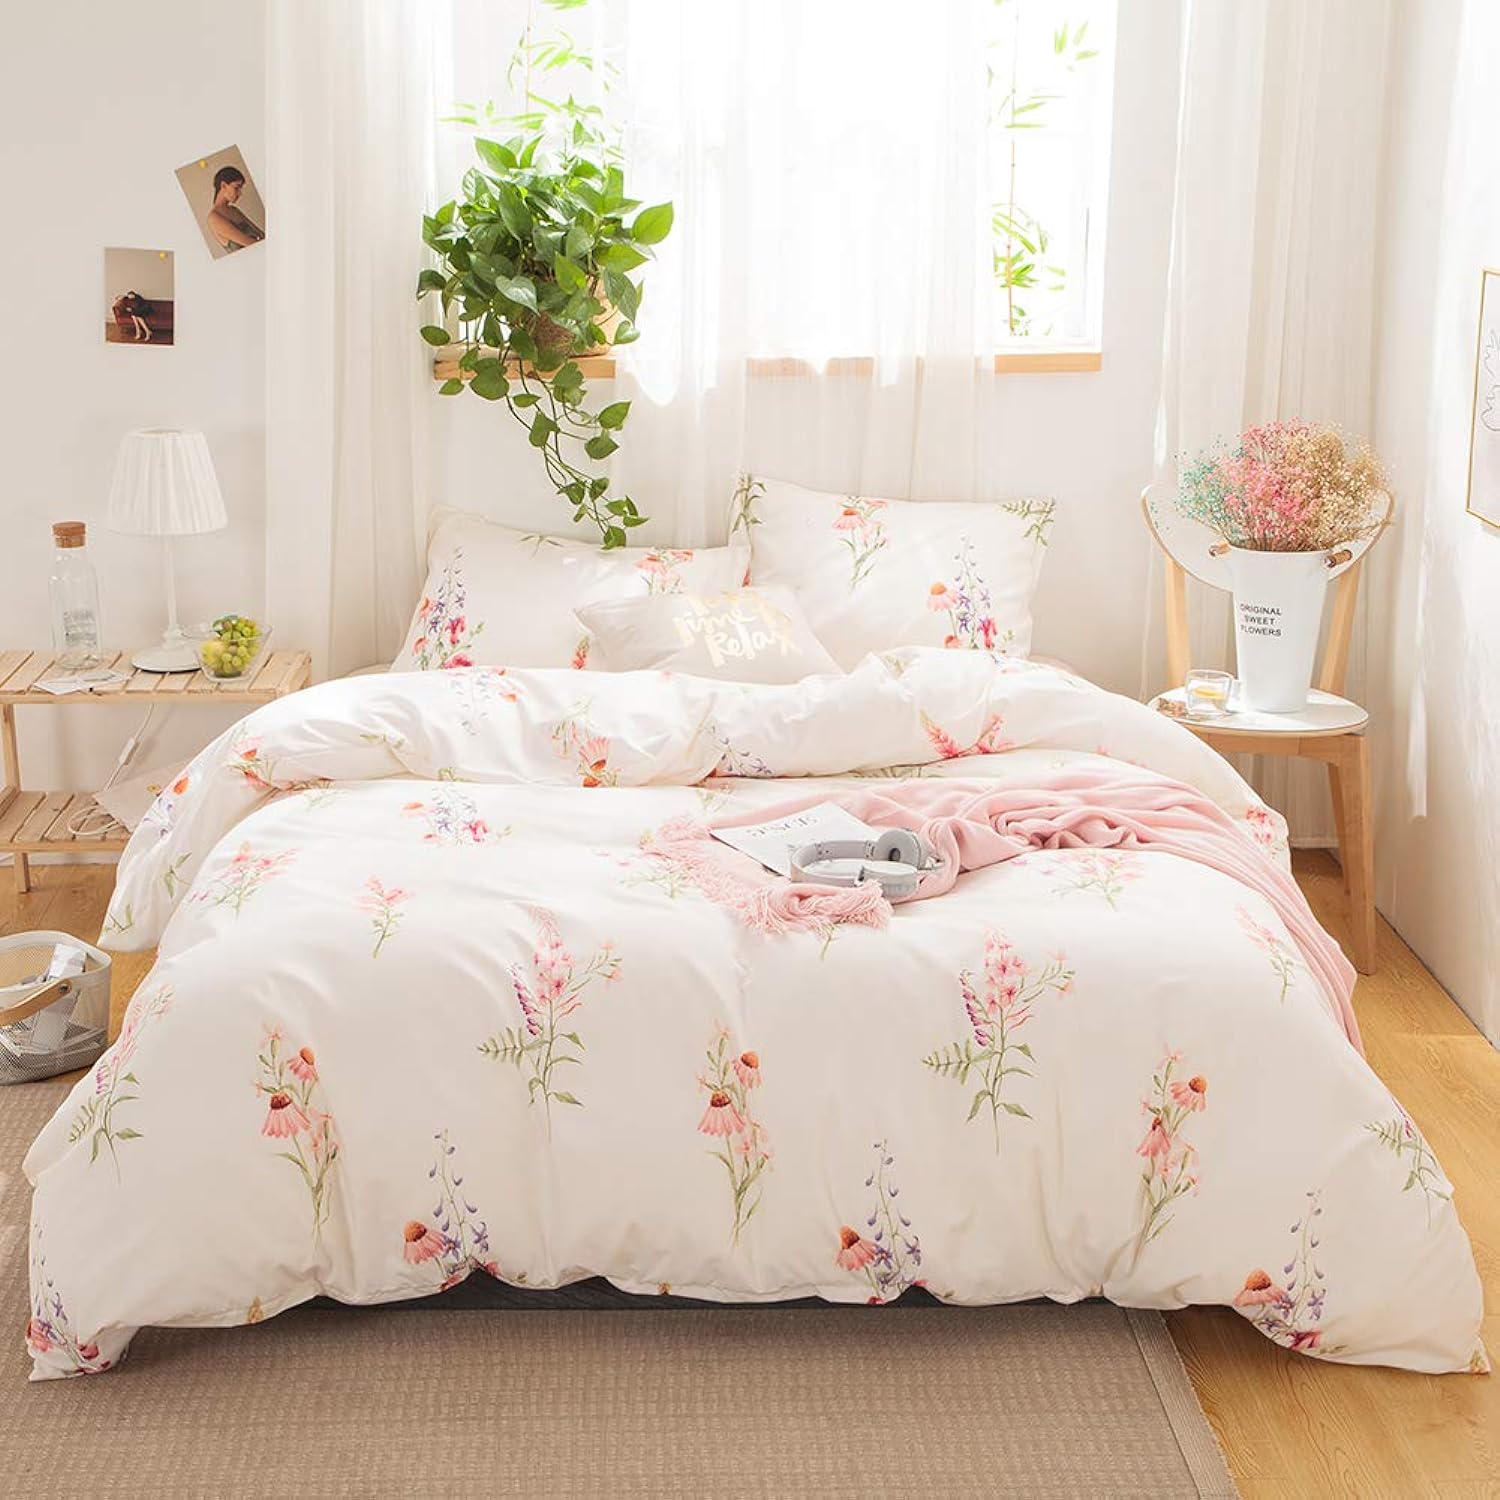 TKM Home Botanical Floral Bedding Pink Flowers Duvet Cover Set Pink Lavender Flowers Printed Design French Country Style Bedd?